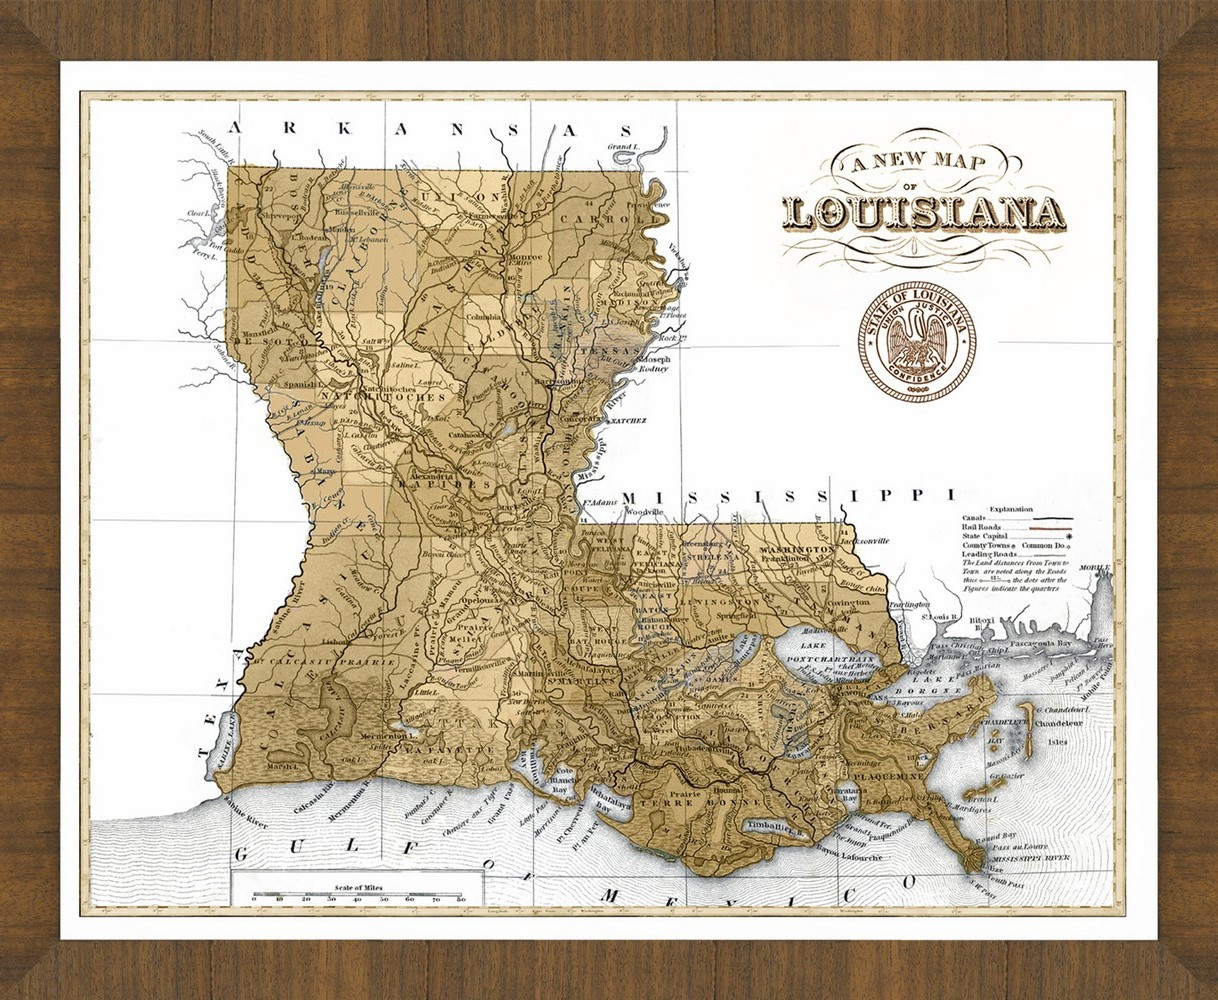 Old Map of Louisiana A Great Framed Map That s Ready to Hang